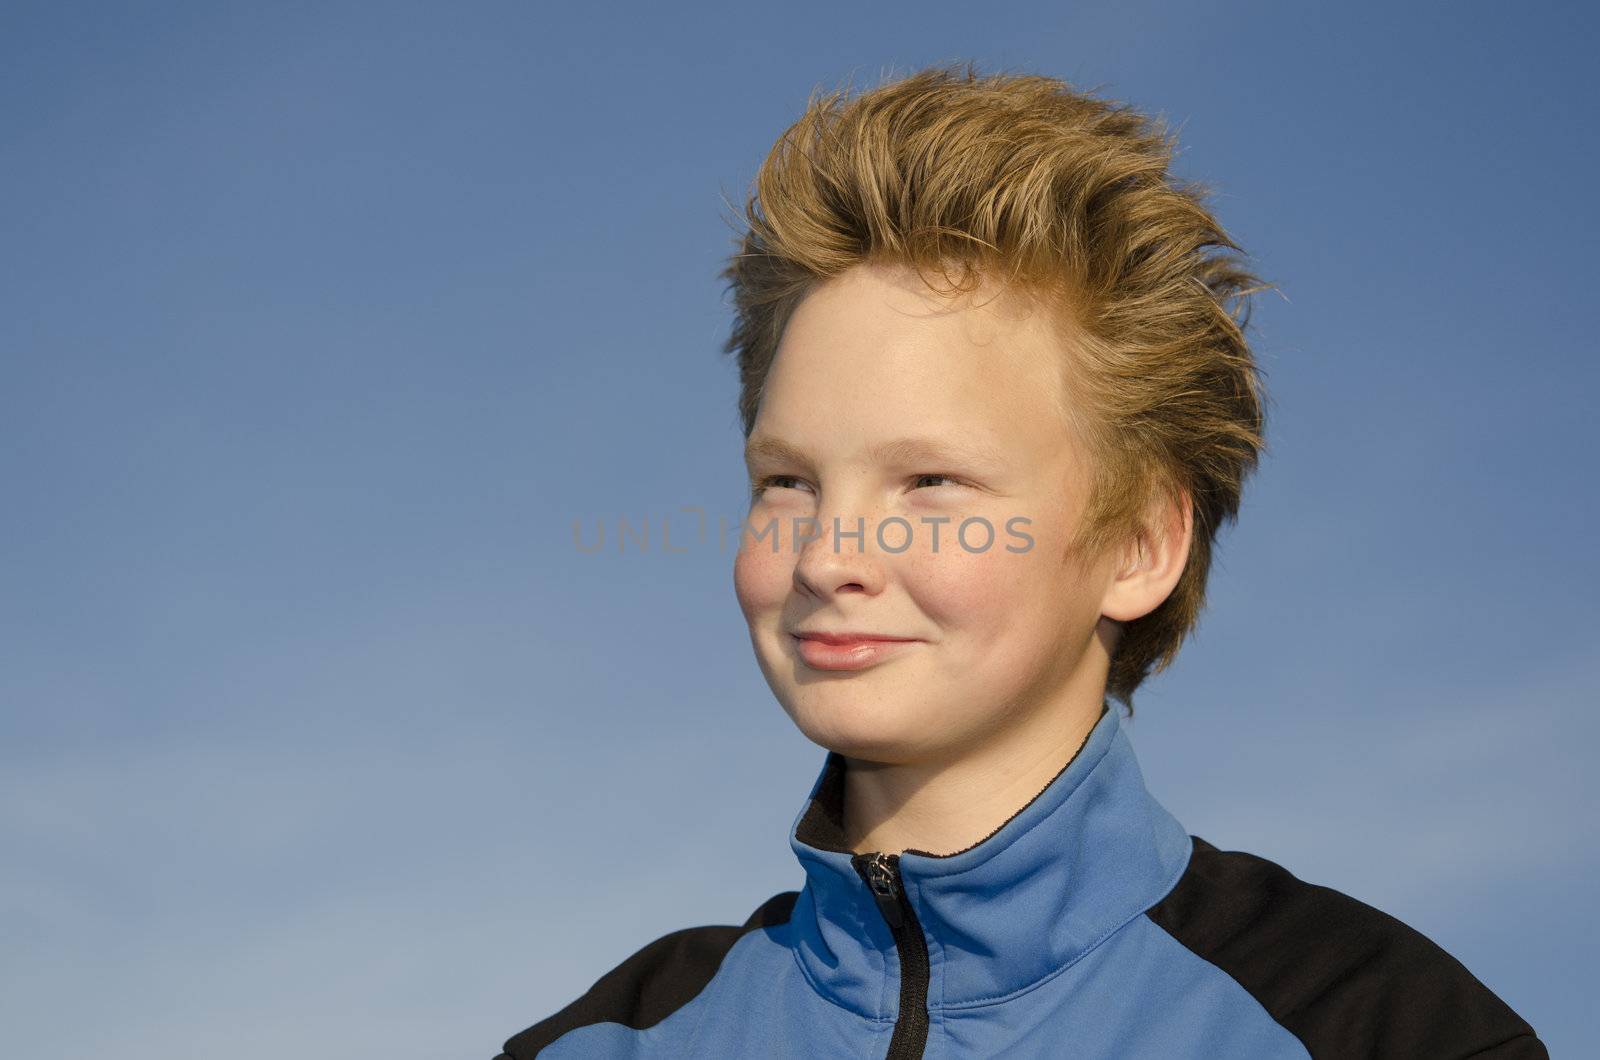 Portrait of guy with spiky hairstyle against blue sky